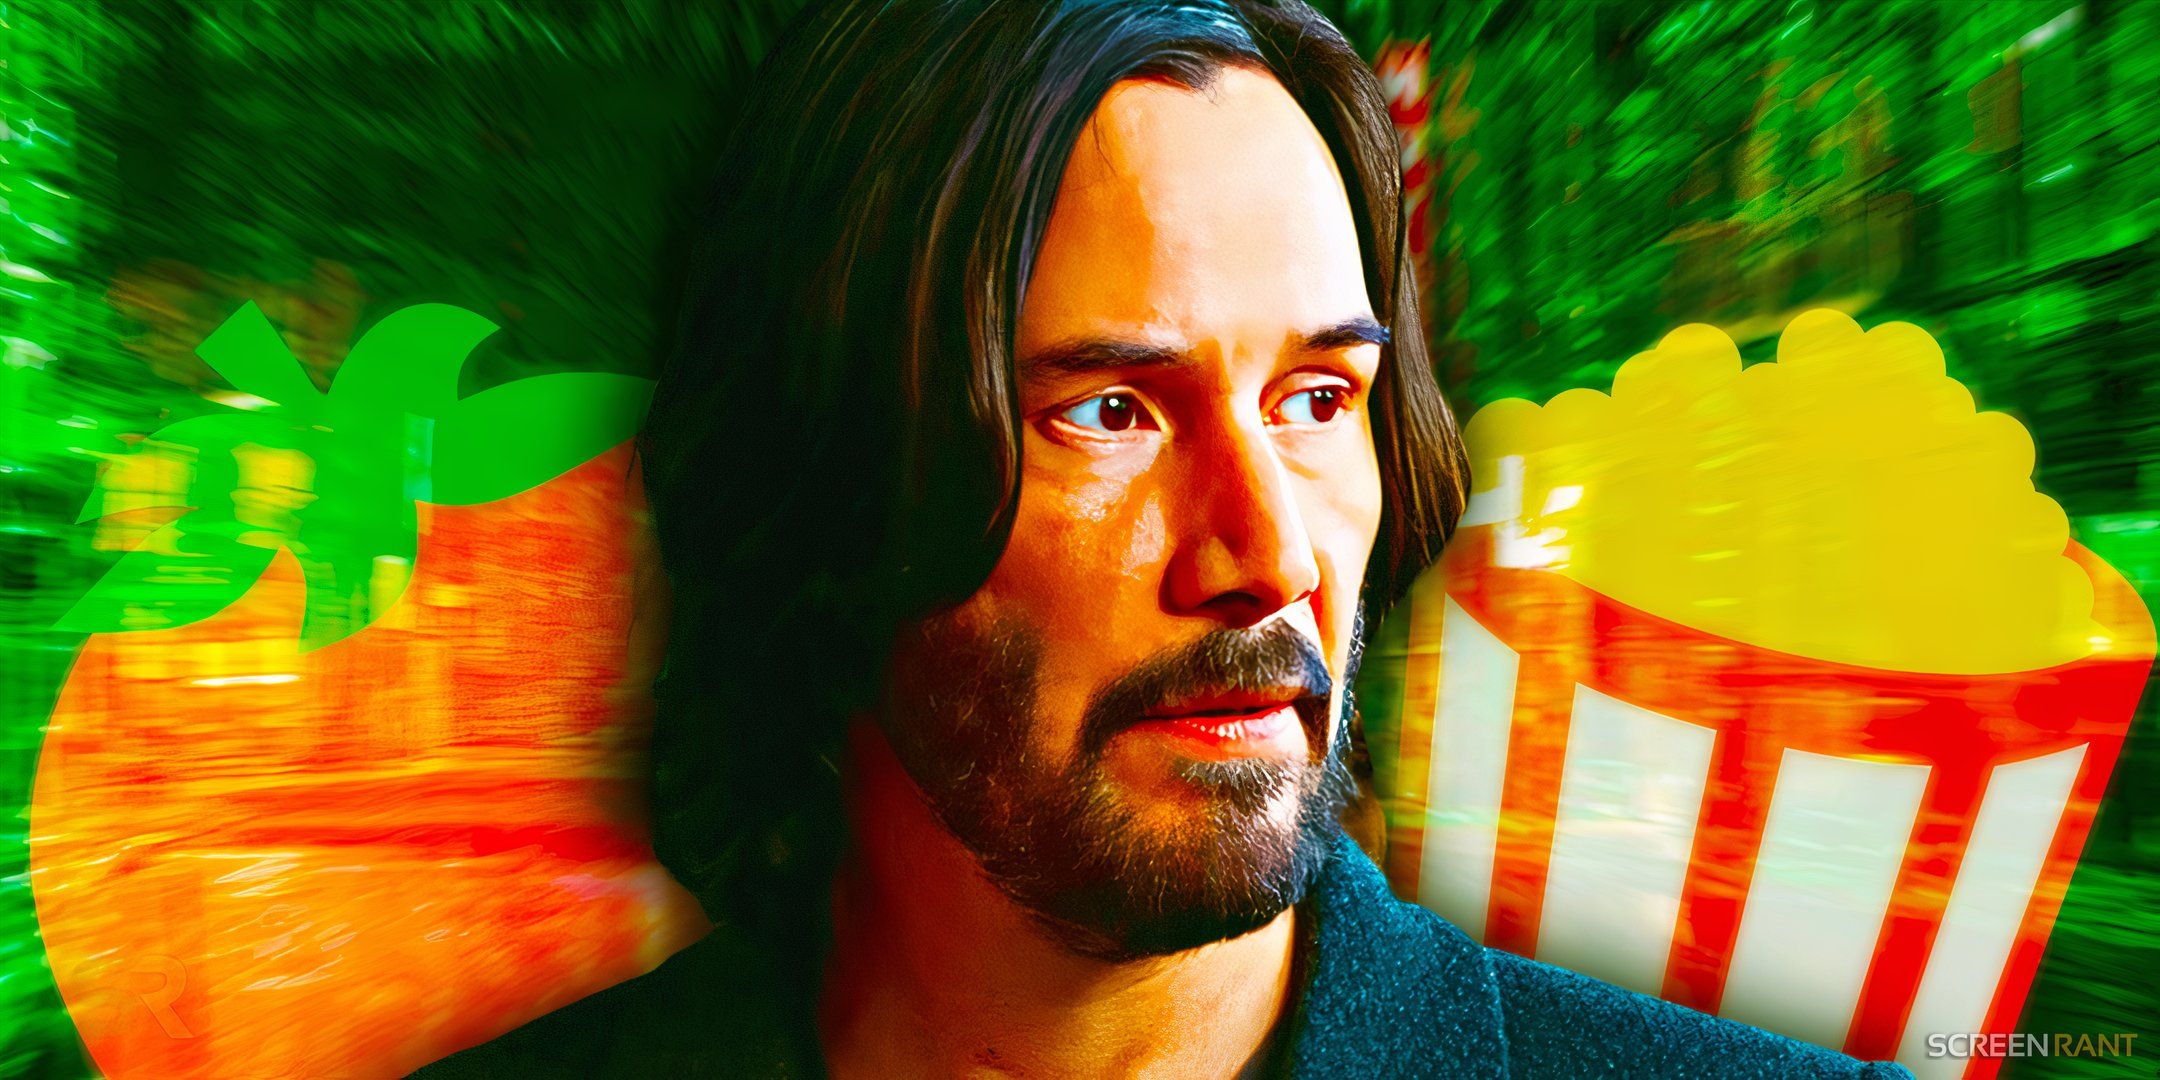  Keanu's Neo from Resurrections, with a Fresh Tomato and Audience Popcorn Bucket from Rotten Tomatoes in the background